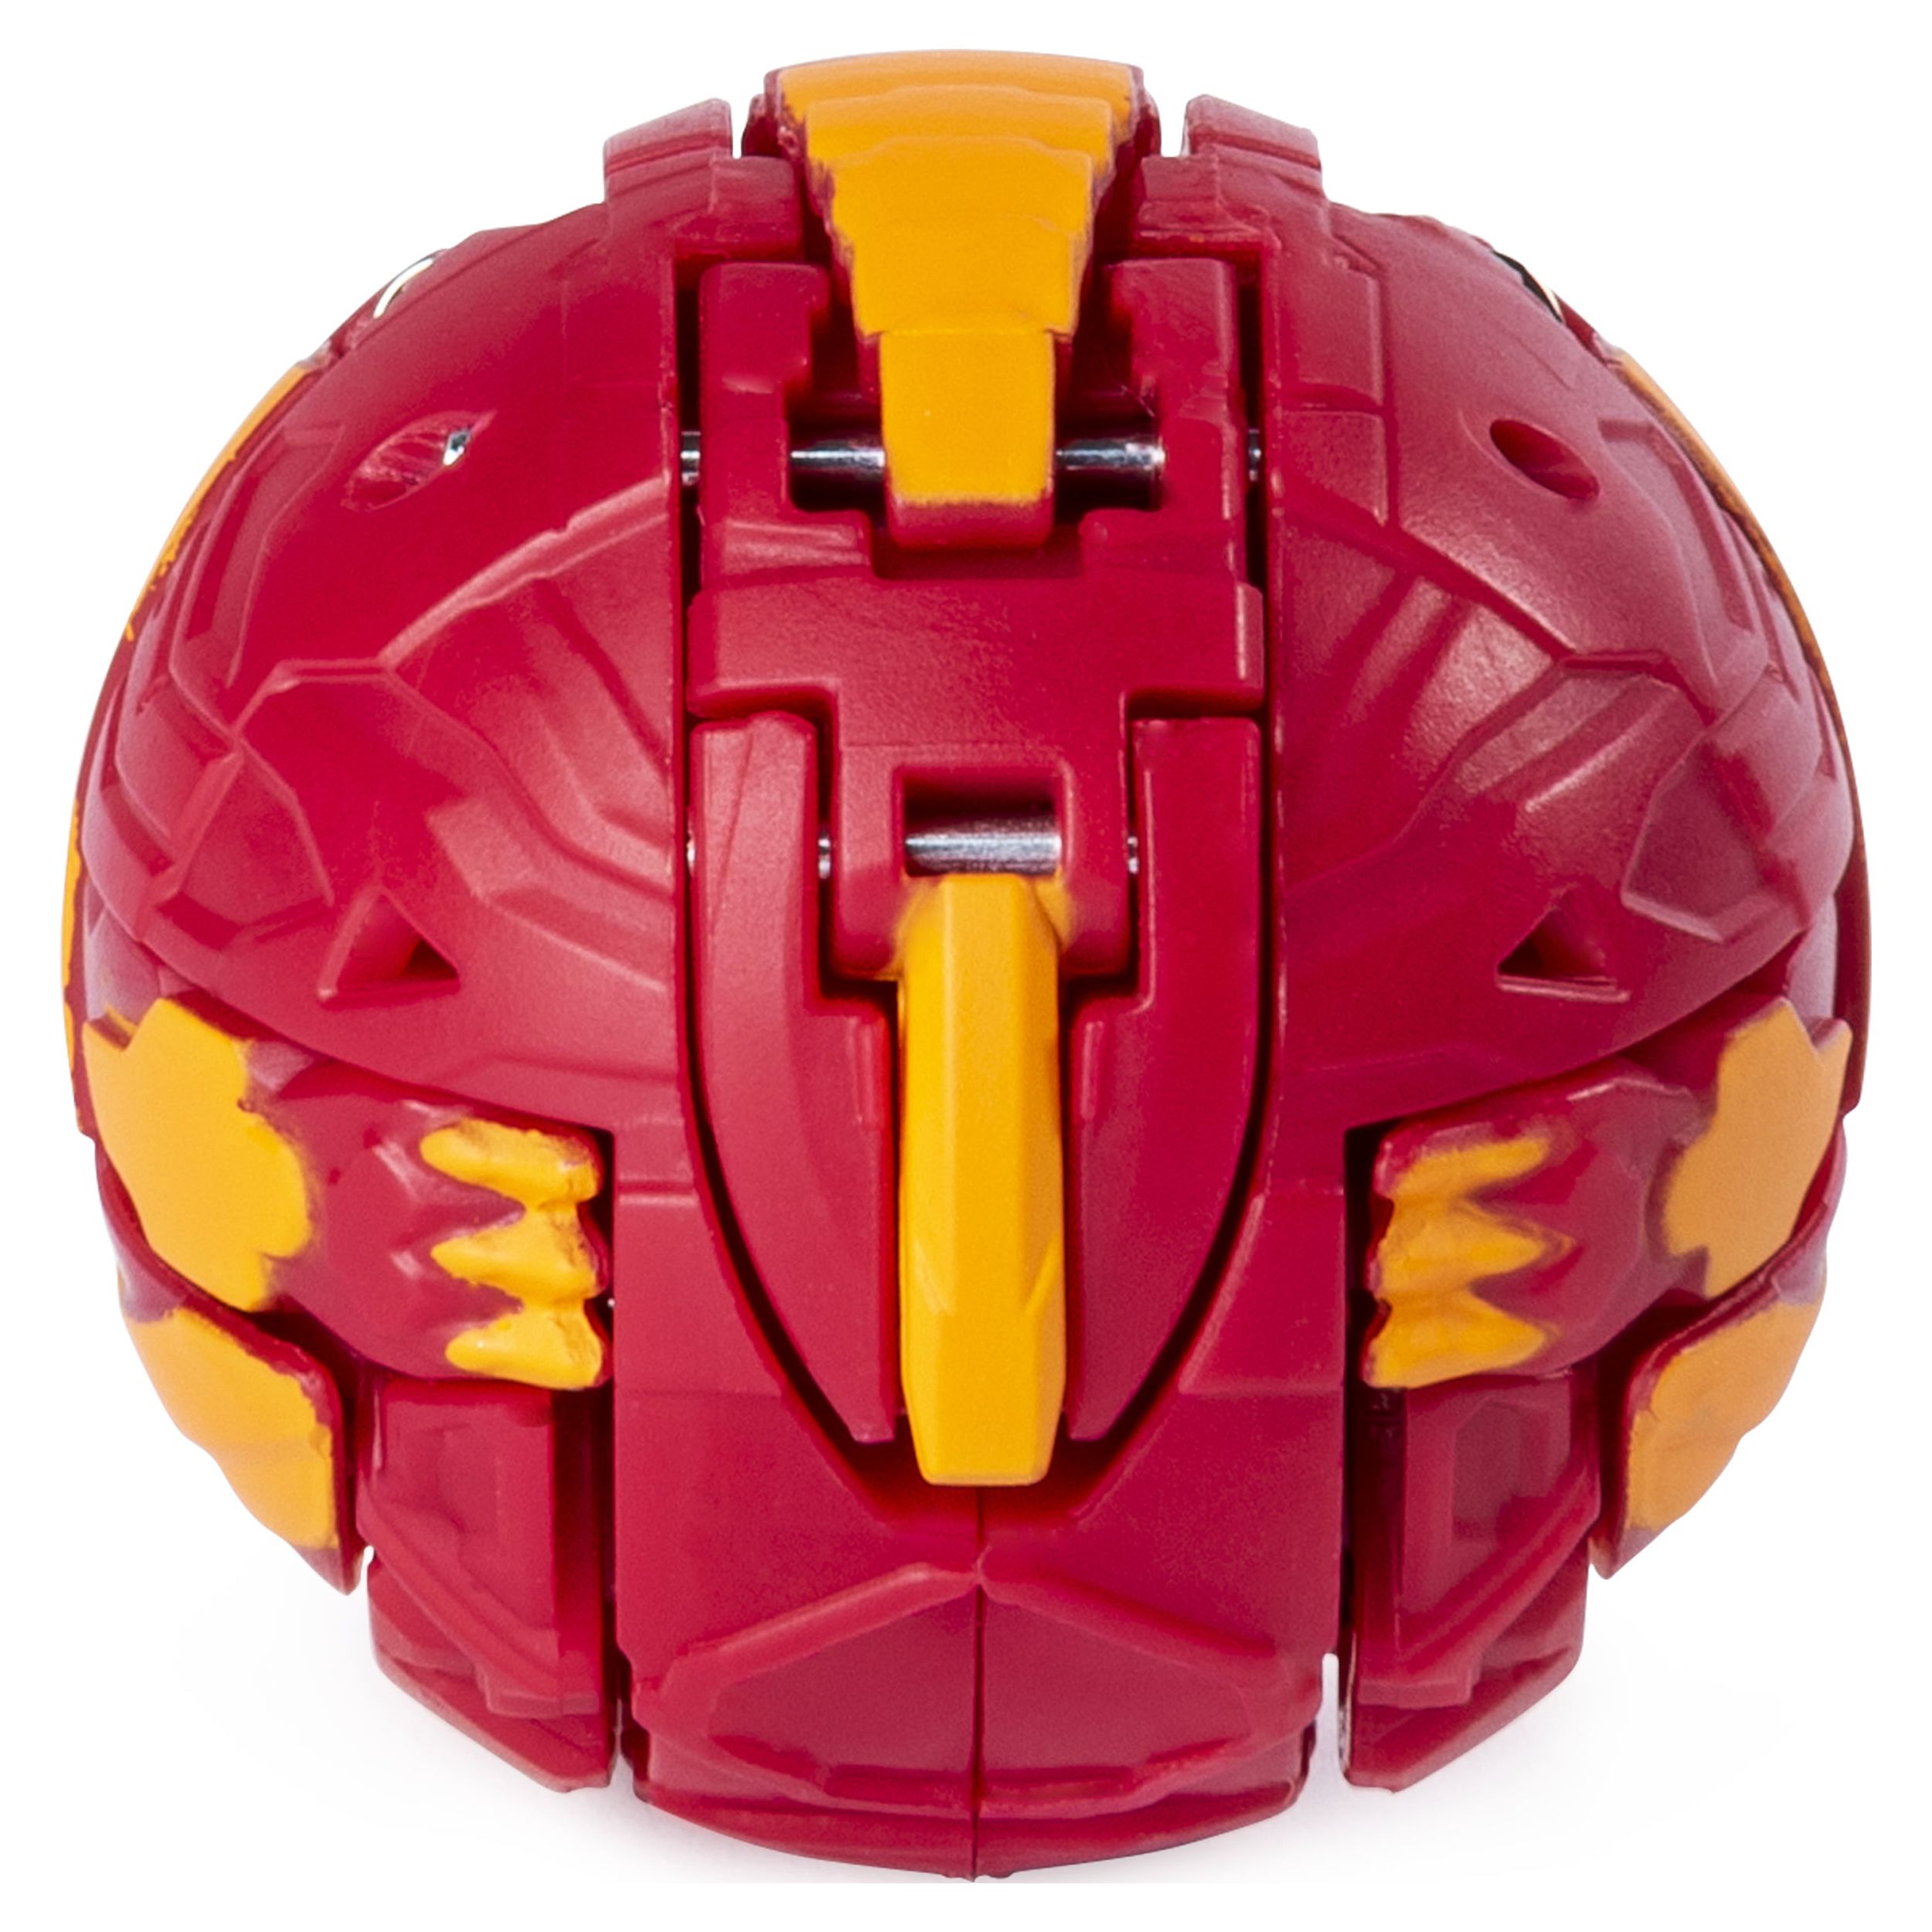 Bakugan, Dragonoid, 2-inch Tall Collectible Action Figure and Trading Card, for Ages 6 and Up - image 4 of 5